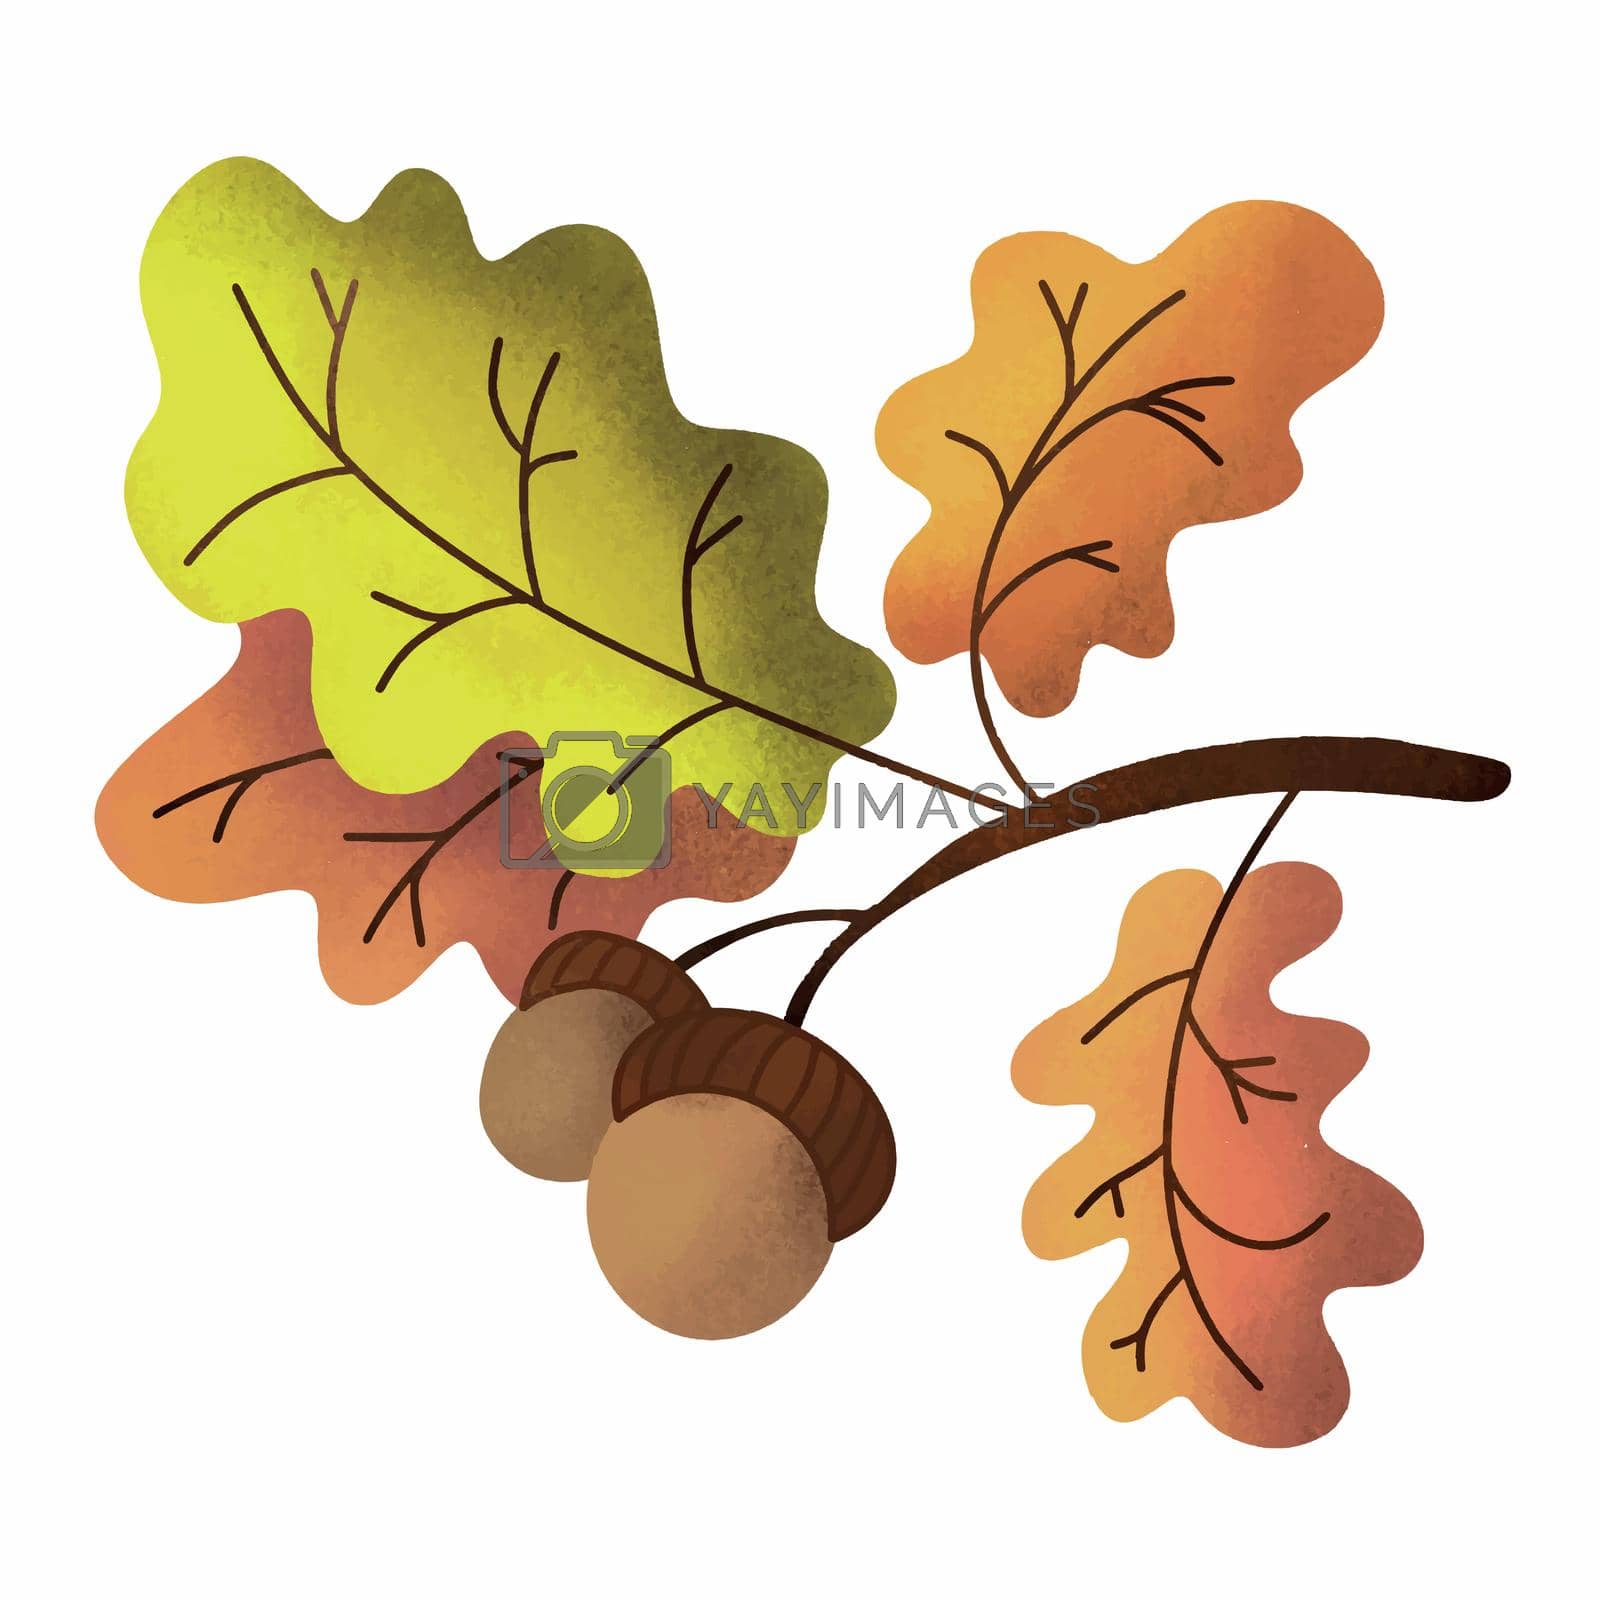 Royalty free image of Vector illustration of an oak branch with leaves and acorns by Olga_OLiAN